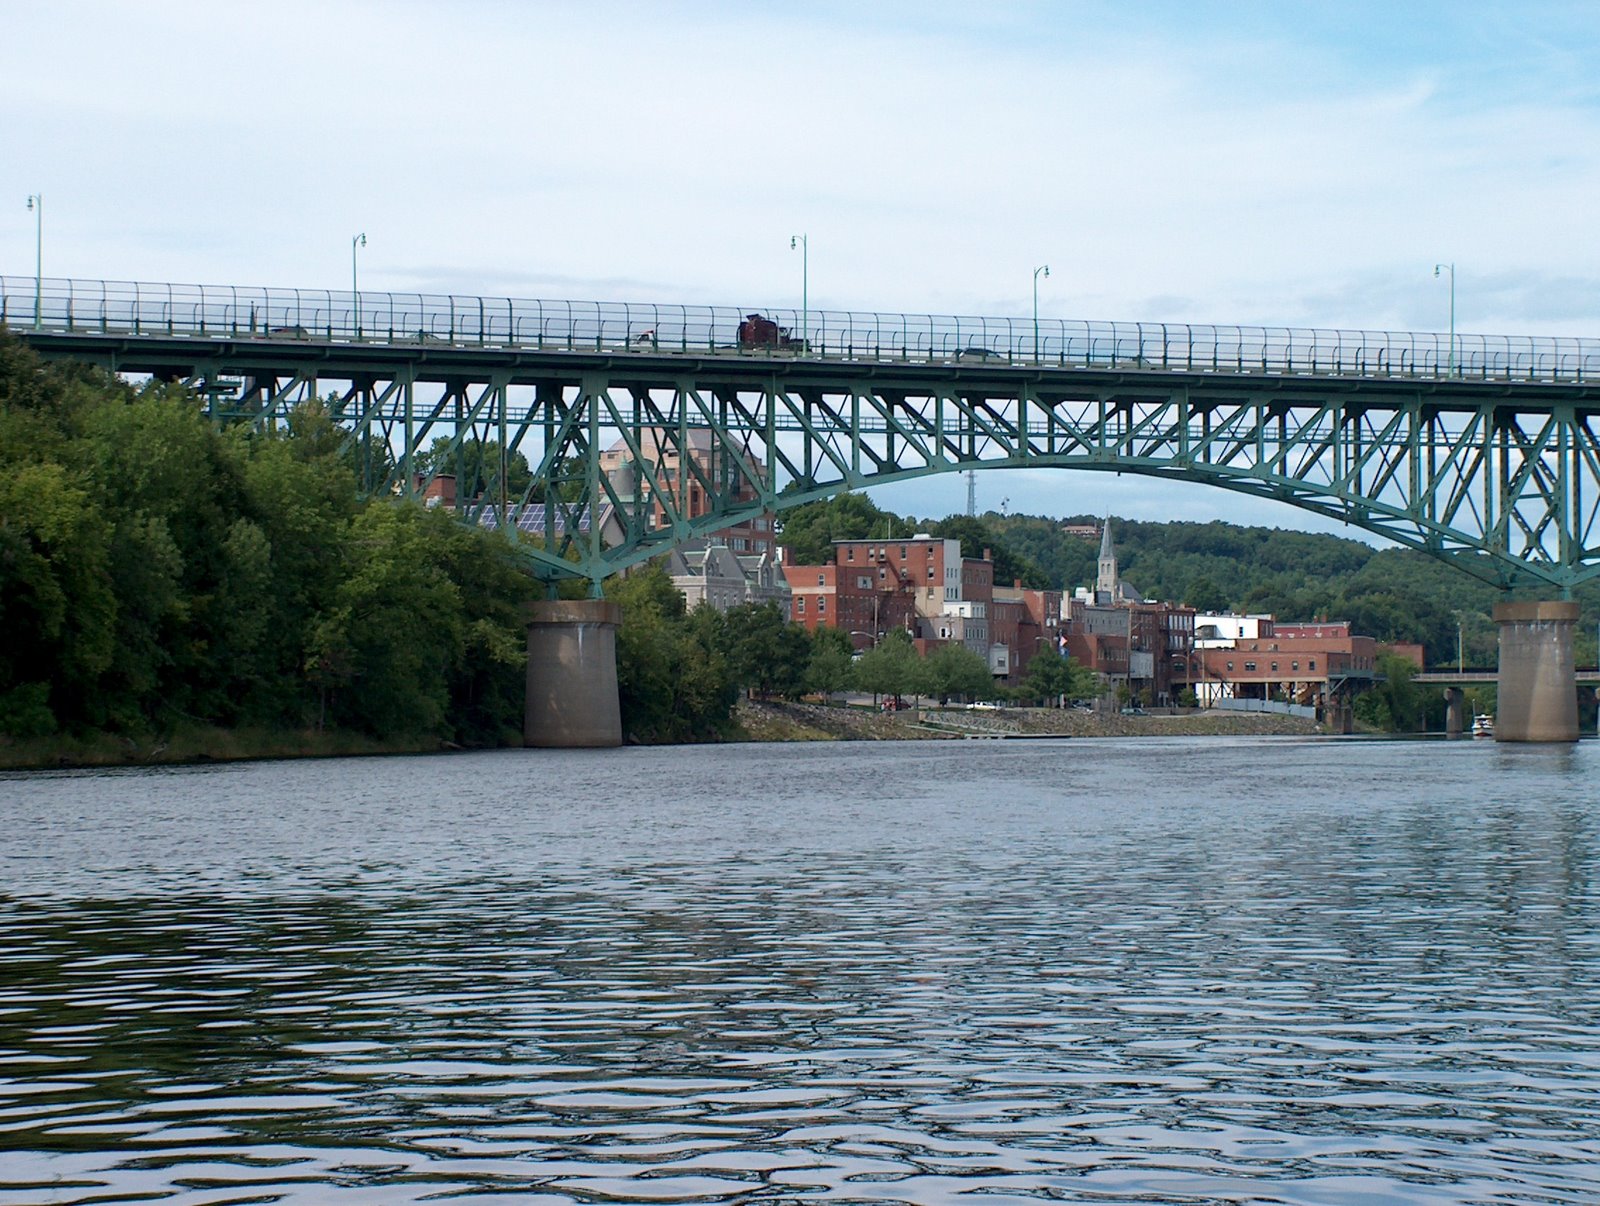 [The+Kennebec+Bridge+At+Augusta+From+The+River.JPG]